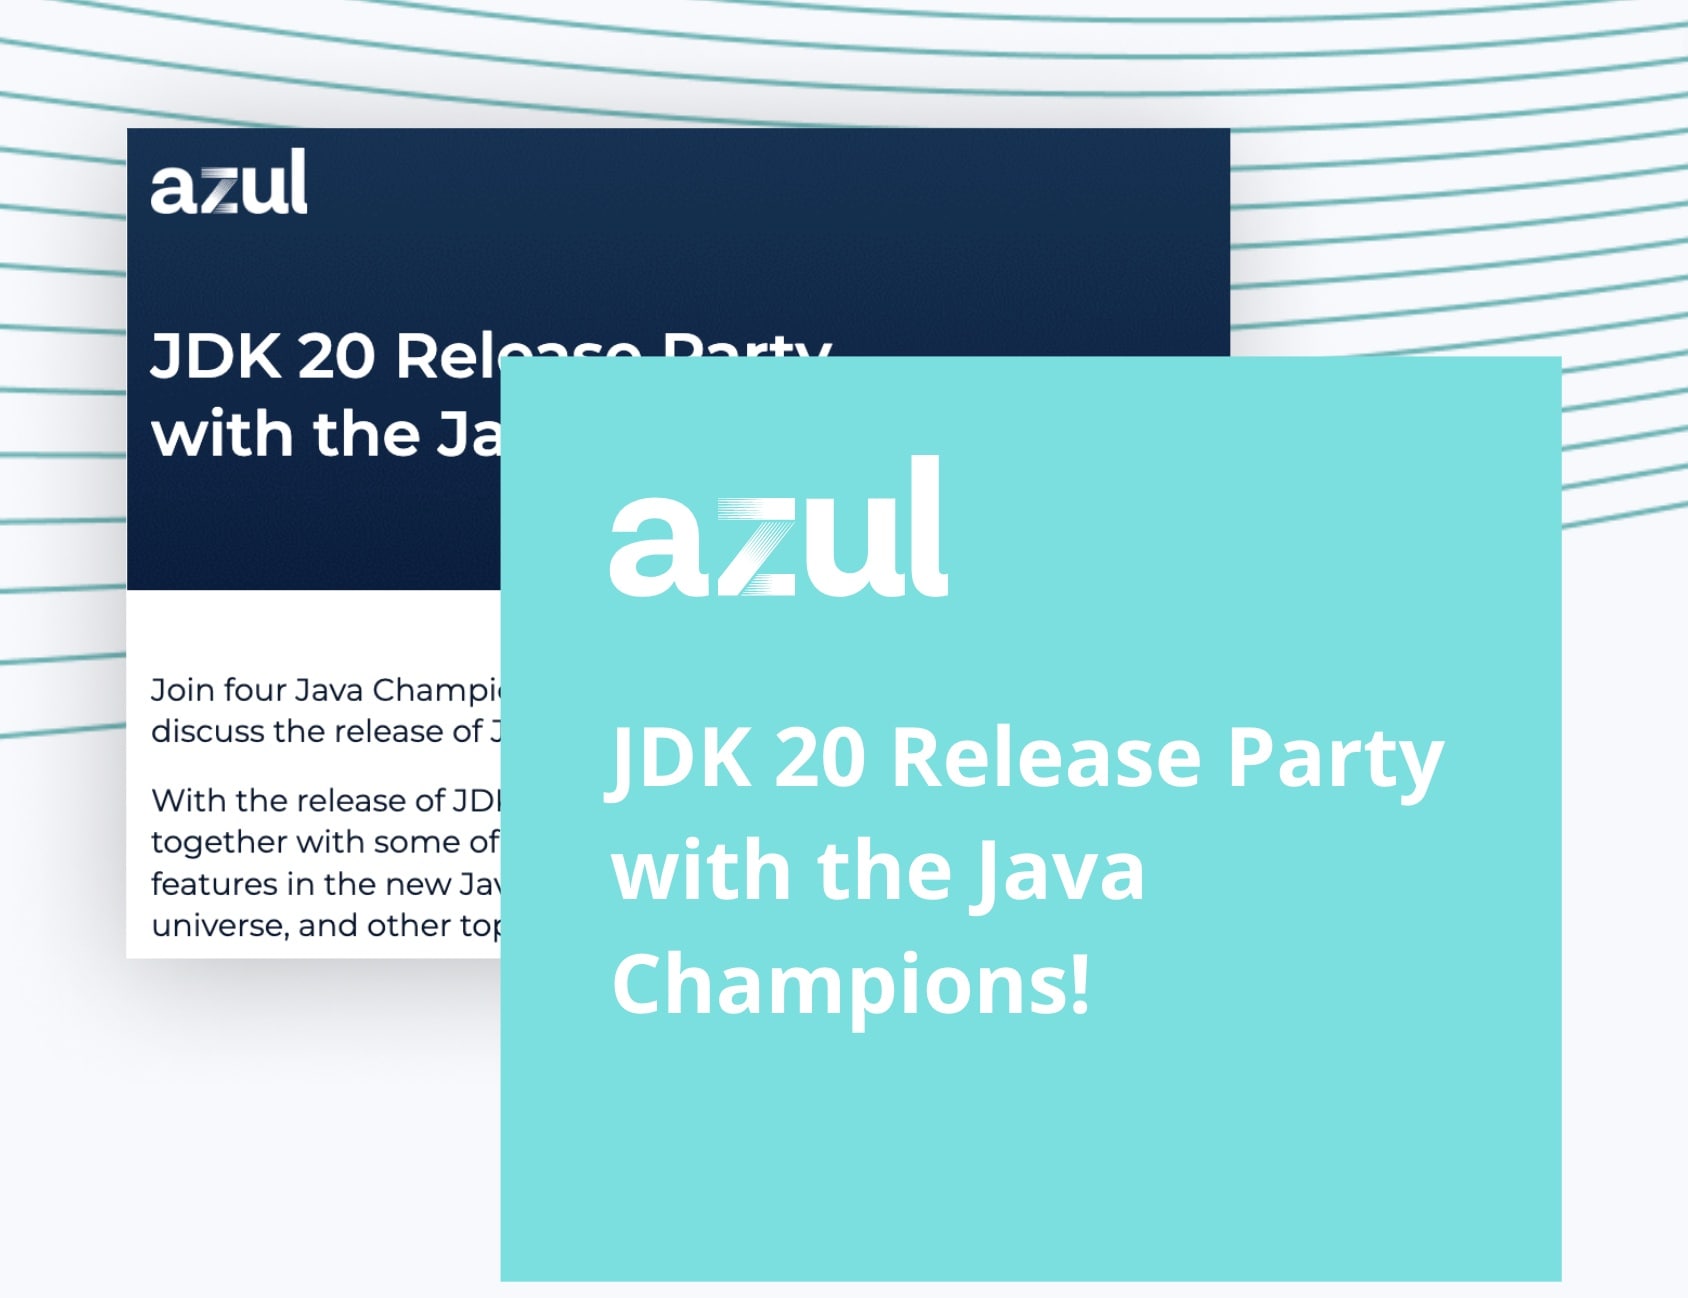 JDK 20 Release Party with the Java Champions!